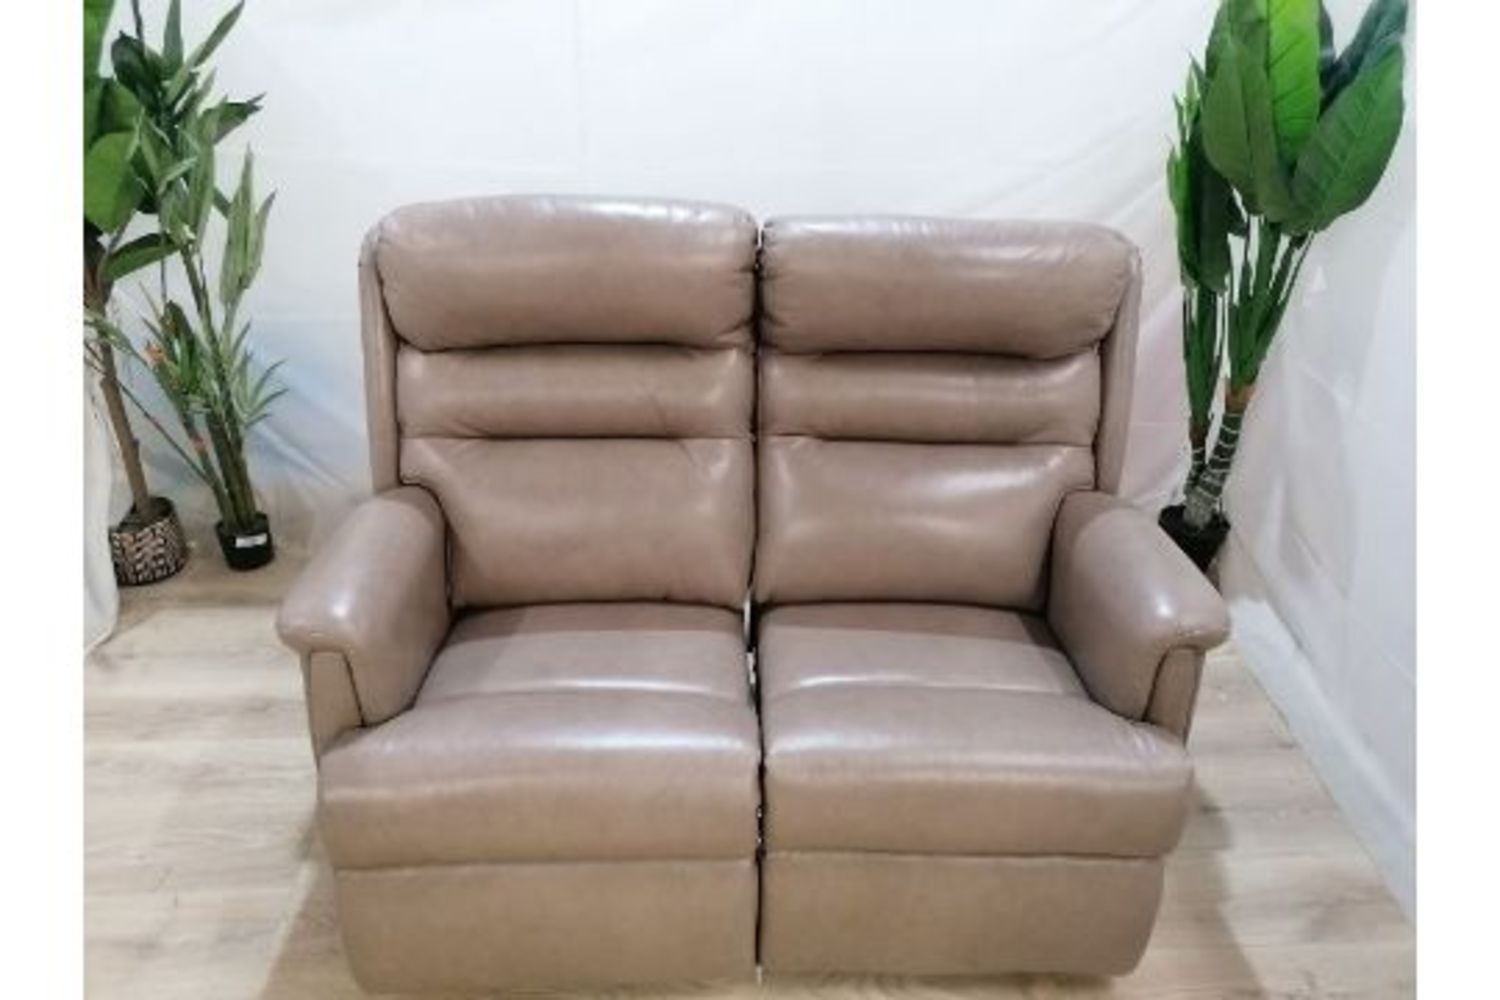 Sofas and Armchairs from Swoon, HSL, Oak furniture land, Costco and more